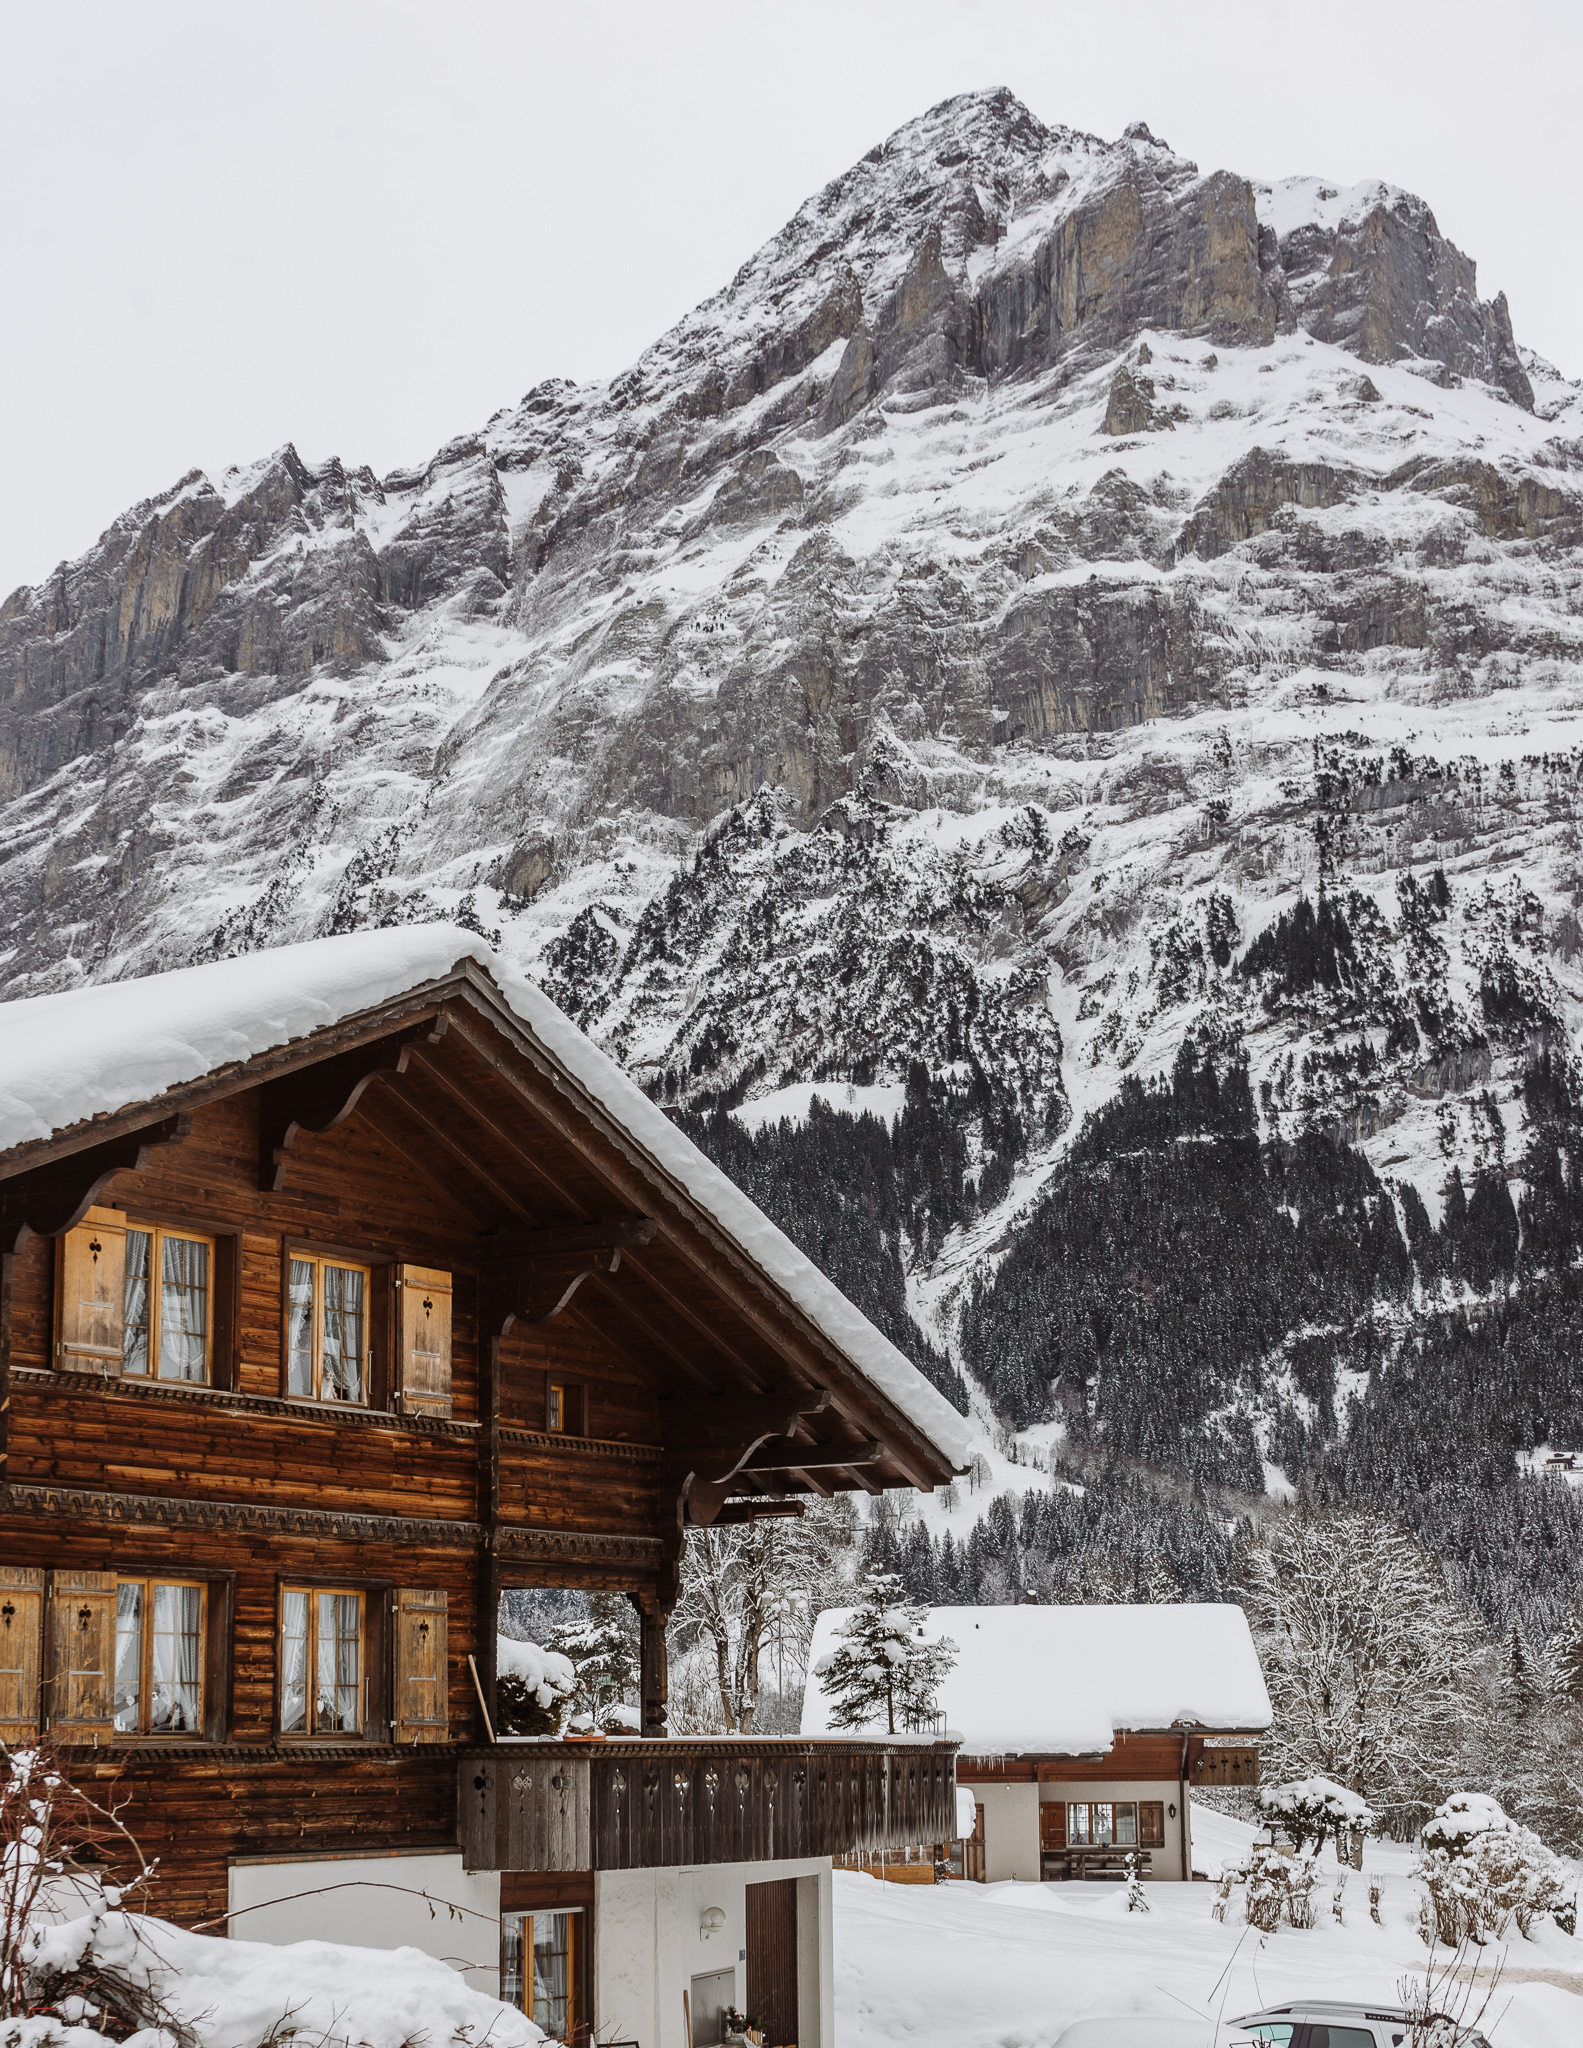 A view of a snowy mountain and a wooden house in Grindelwald village, near Lauterbrunnen in winter.